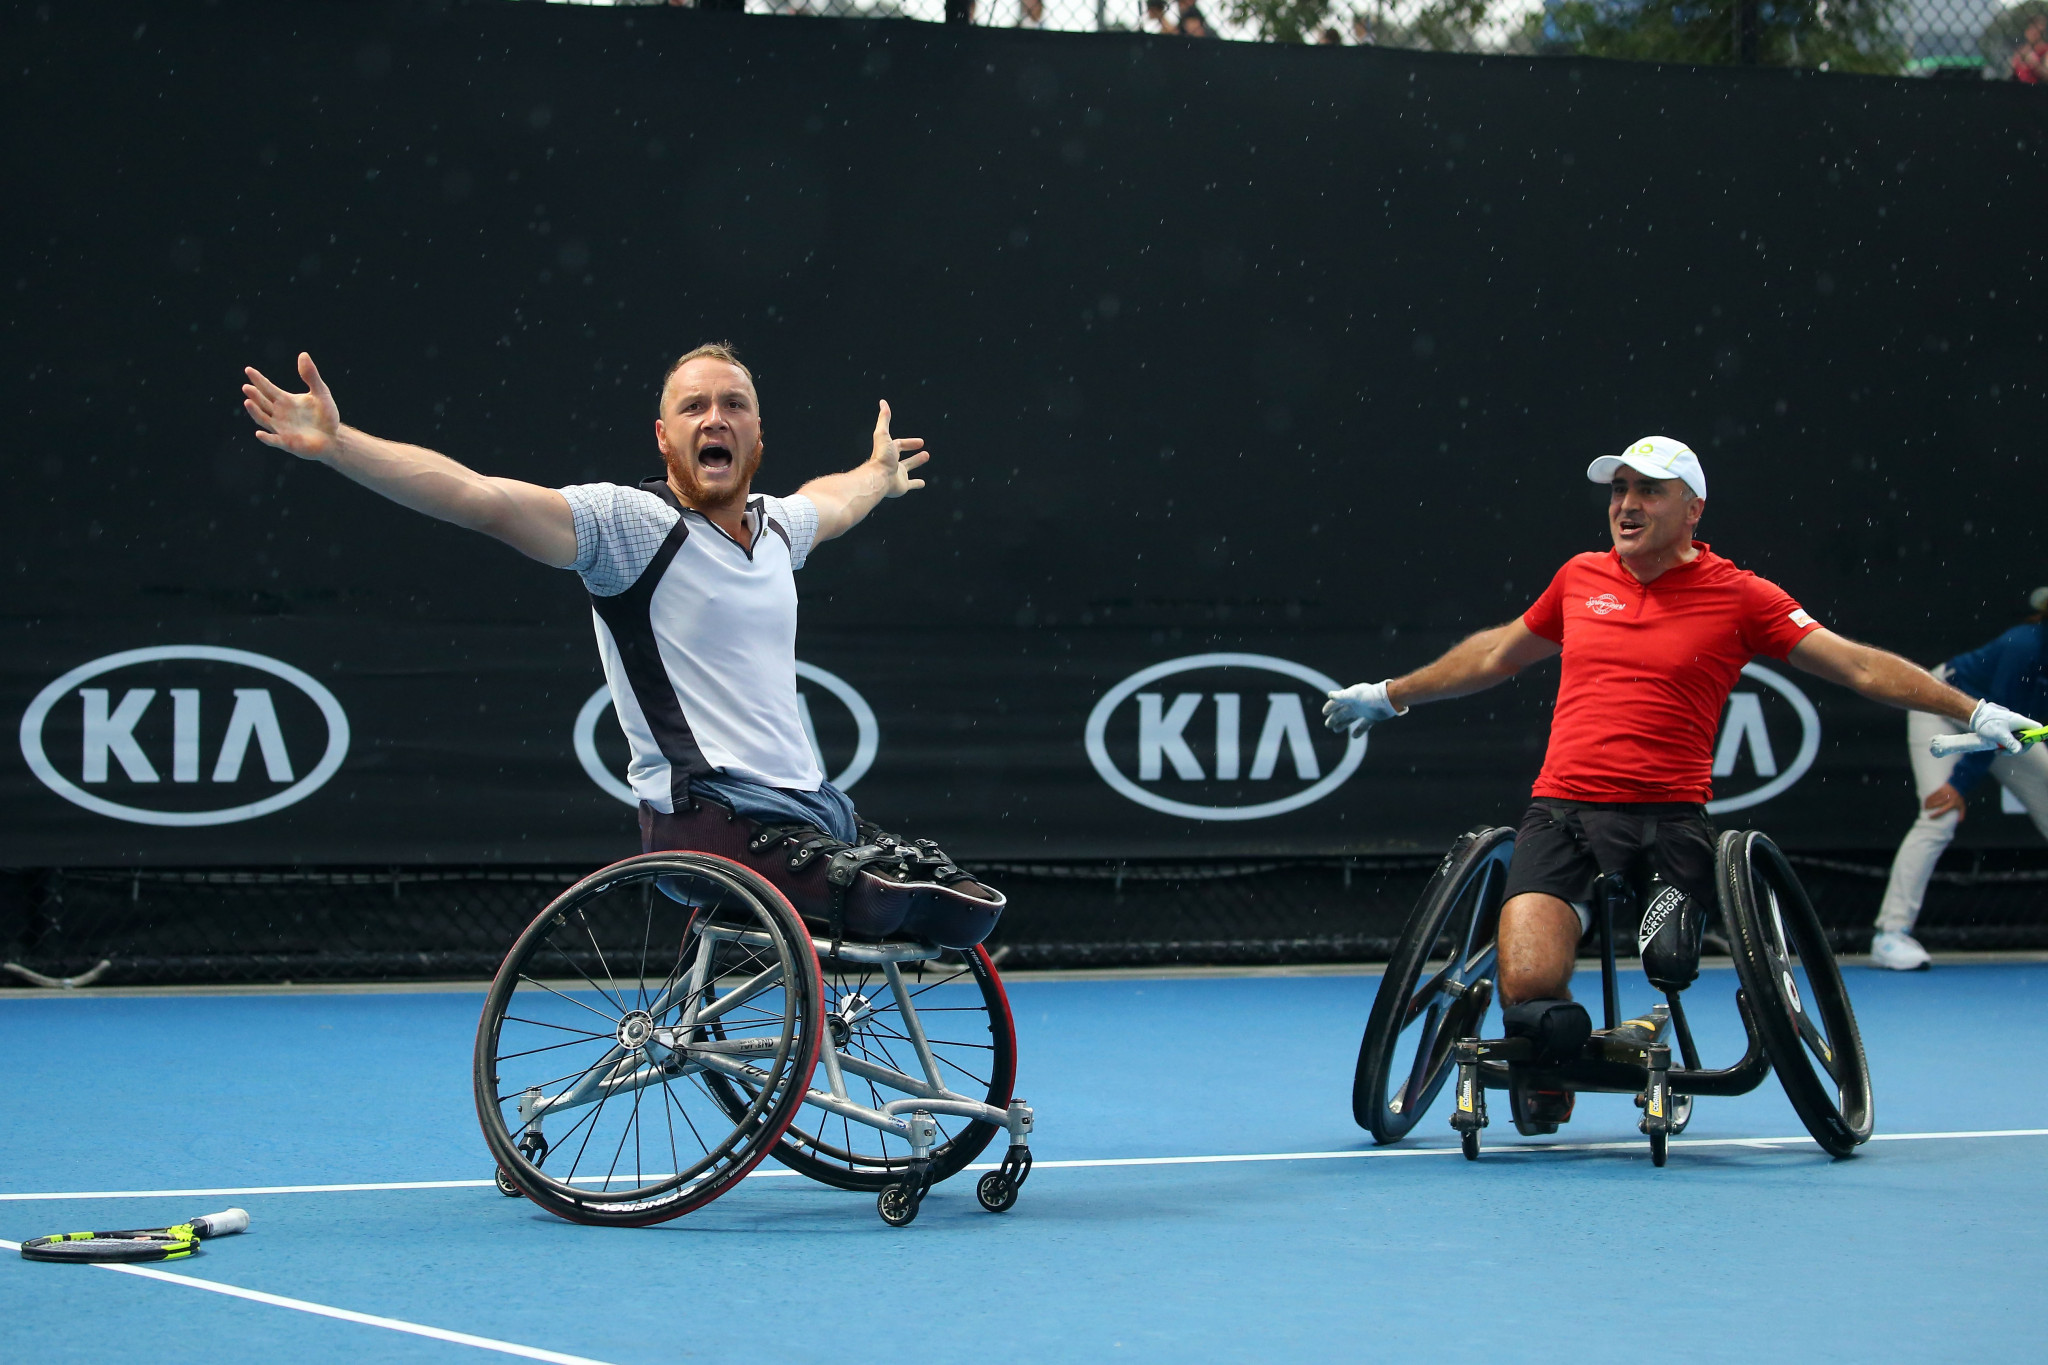 Nicolas Peifer and Stephane Houdet triumphed in the men's wheelchair doubles final ©Getty Images